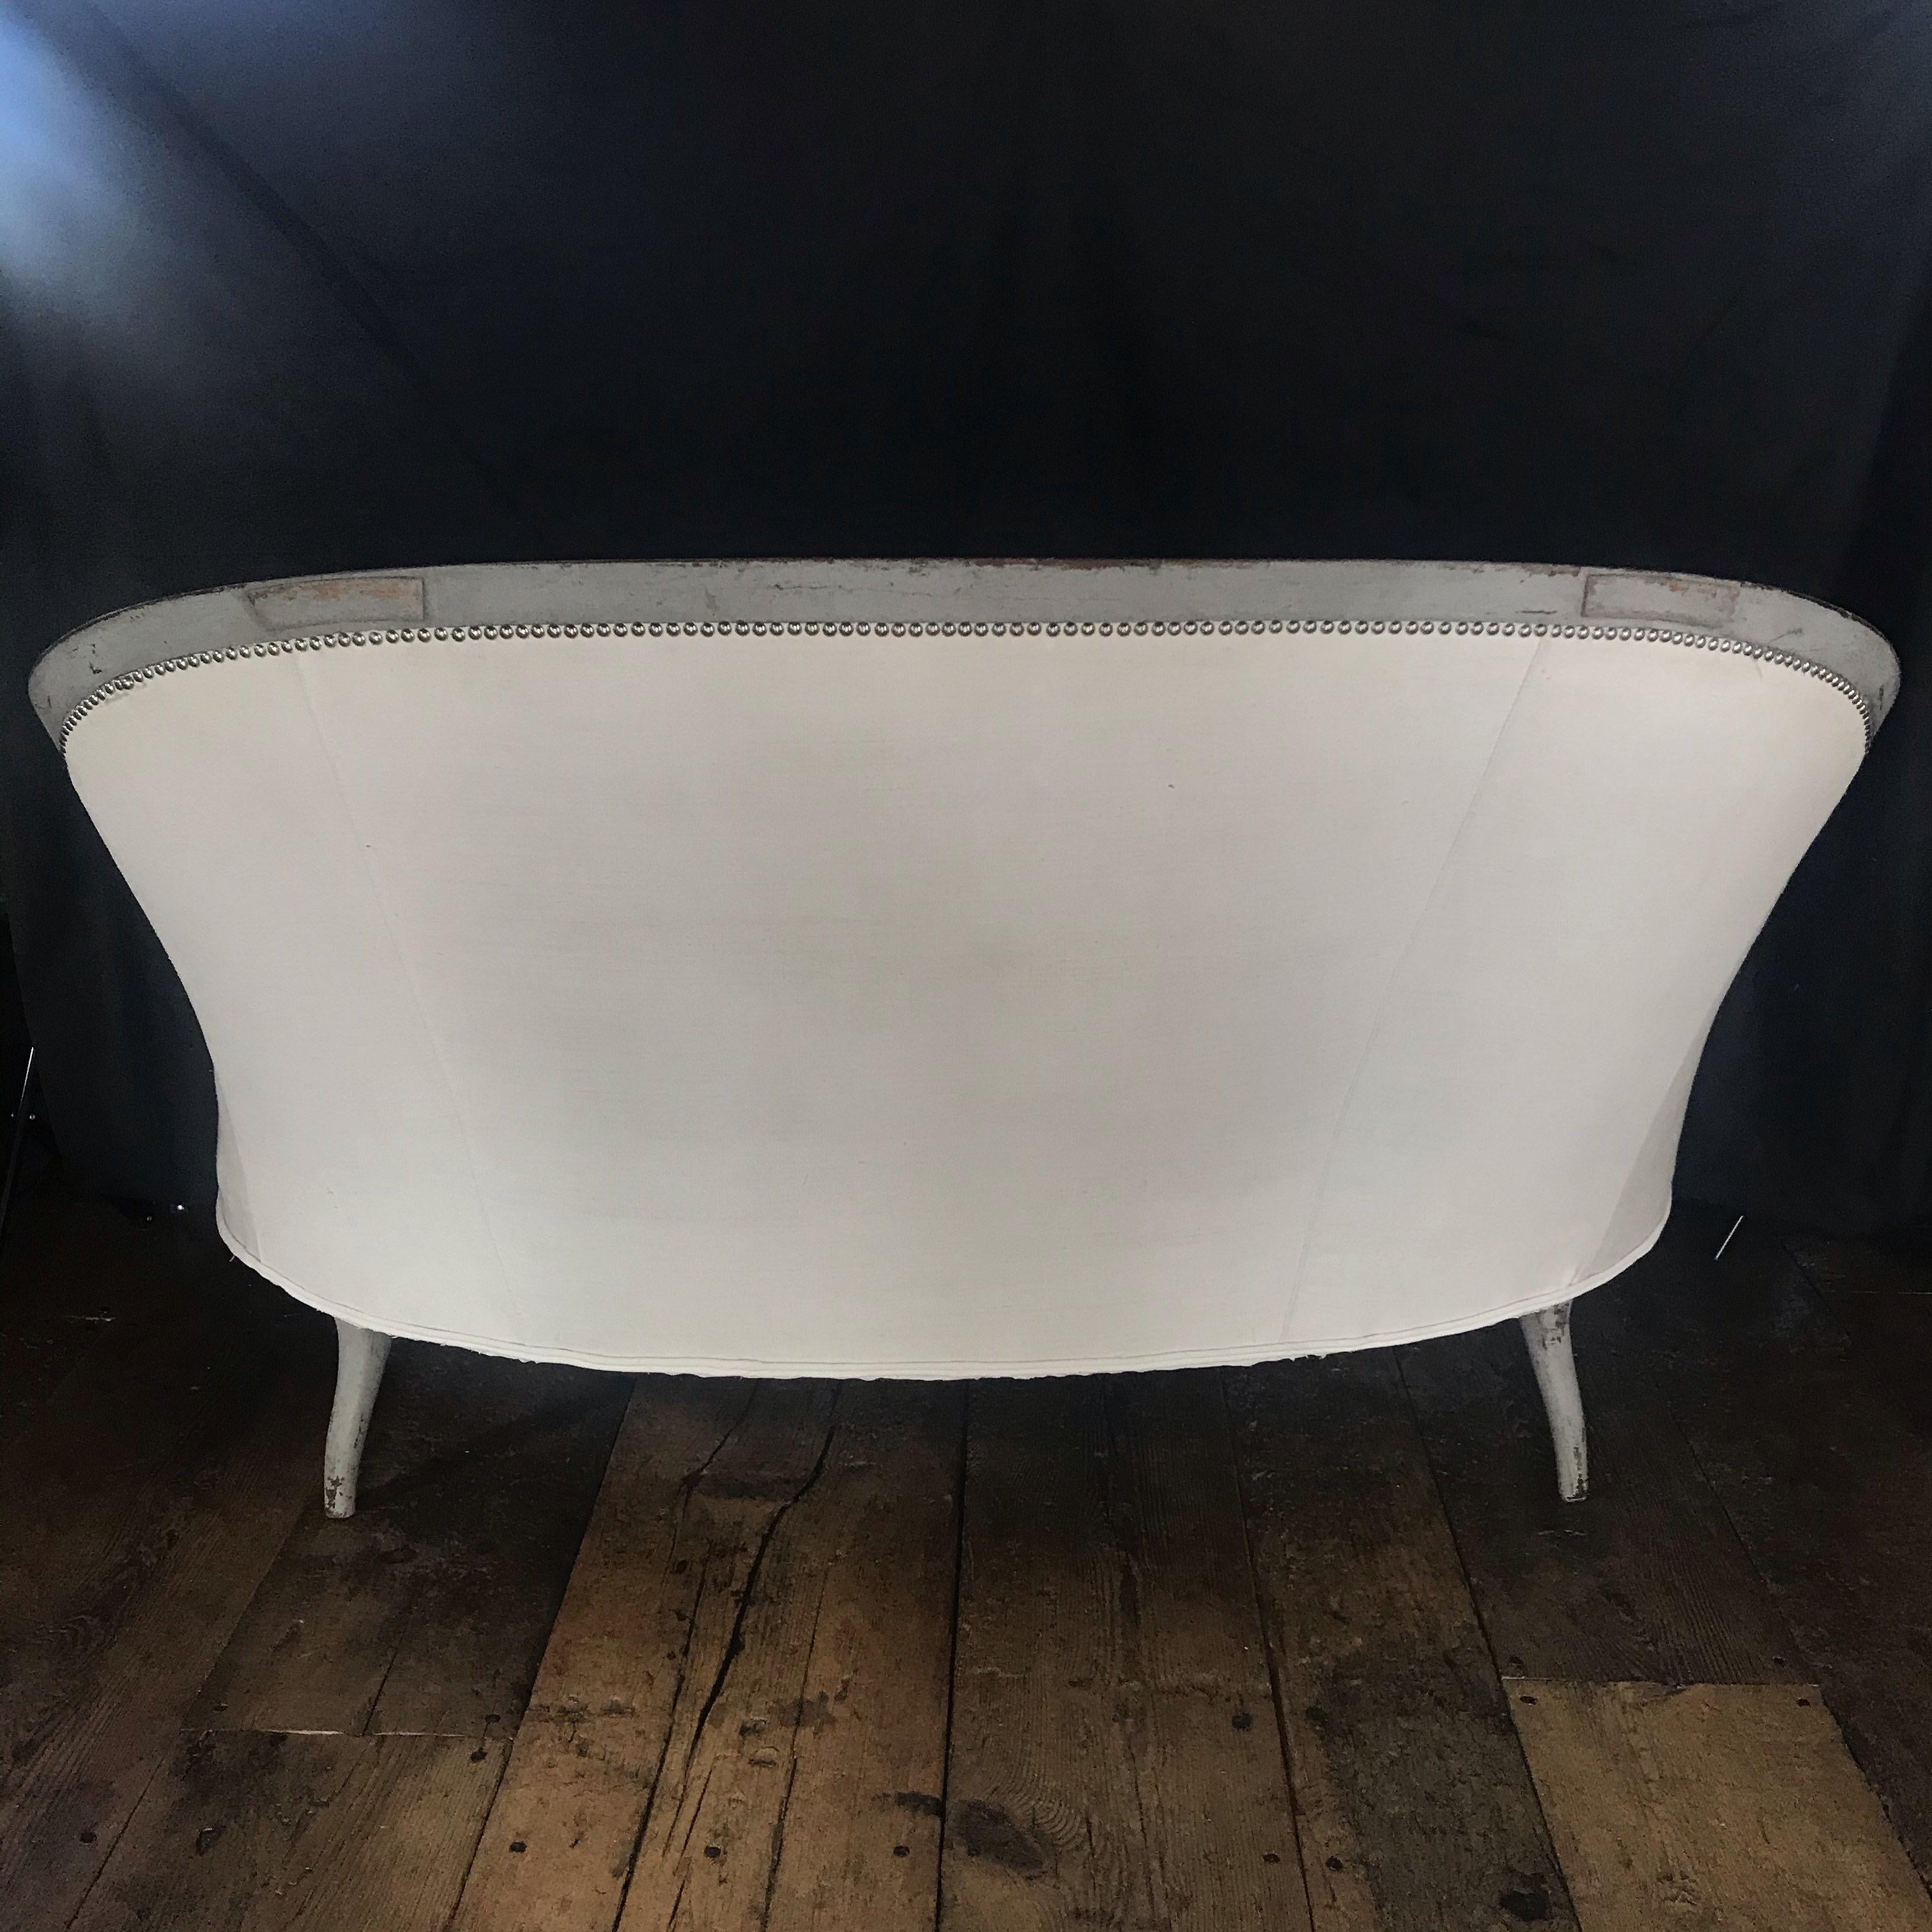 A very elegant and wonderfully drawn French 19th century loveseat small sofa in soft gray paintwork. French, circa 1870. Having a very chic profile, the shapely curved back is decorated with original tacks and reupholstered in immaculate French